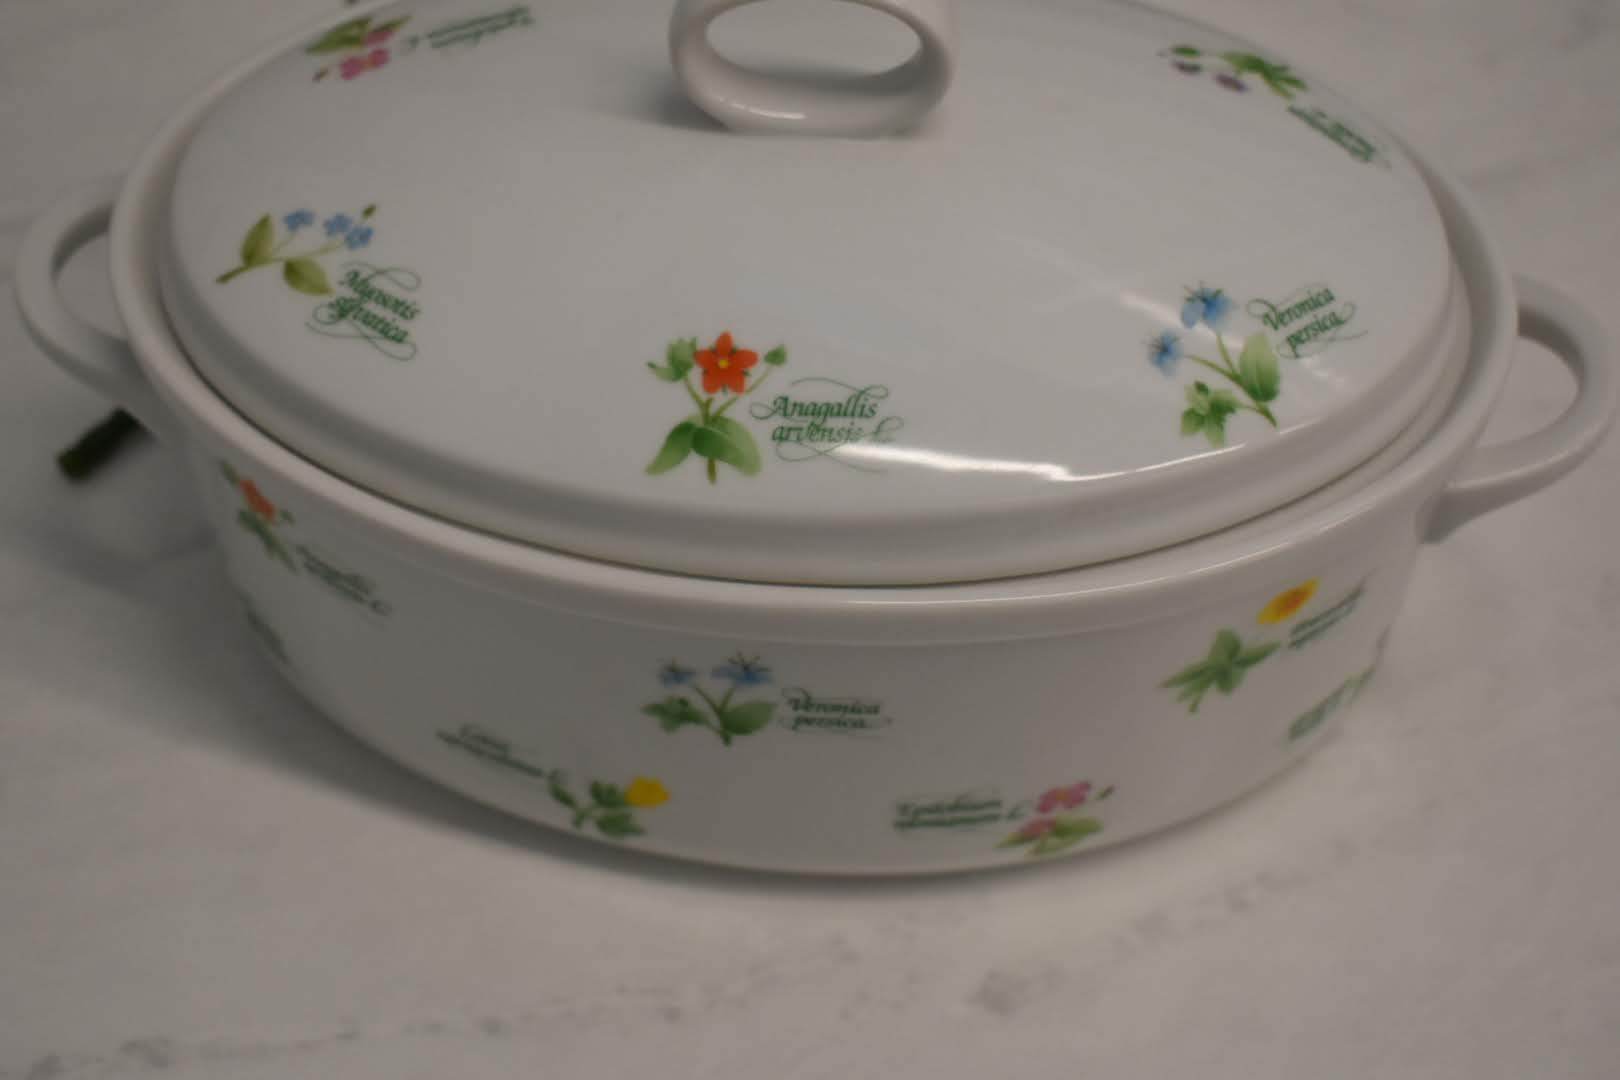 Anchor Hocking Fine Porcelain China - Botanical Floral Pattern - Oval Casserole Dish / Soufflé Dish with Lid